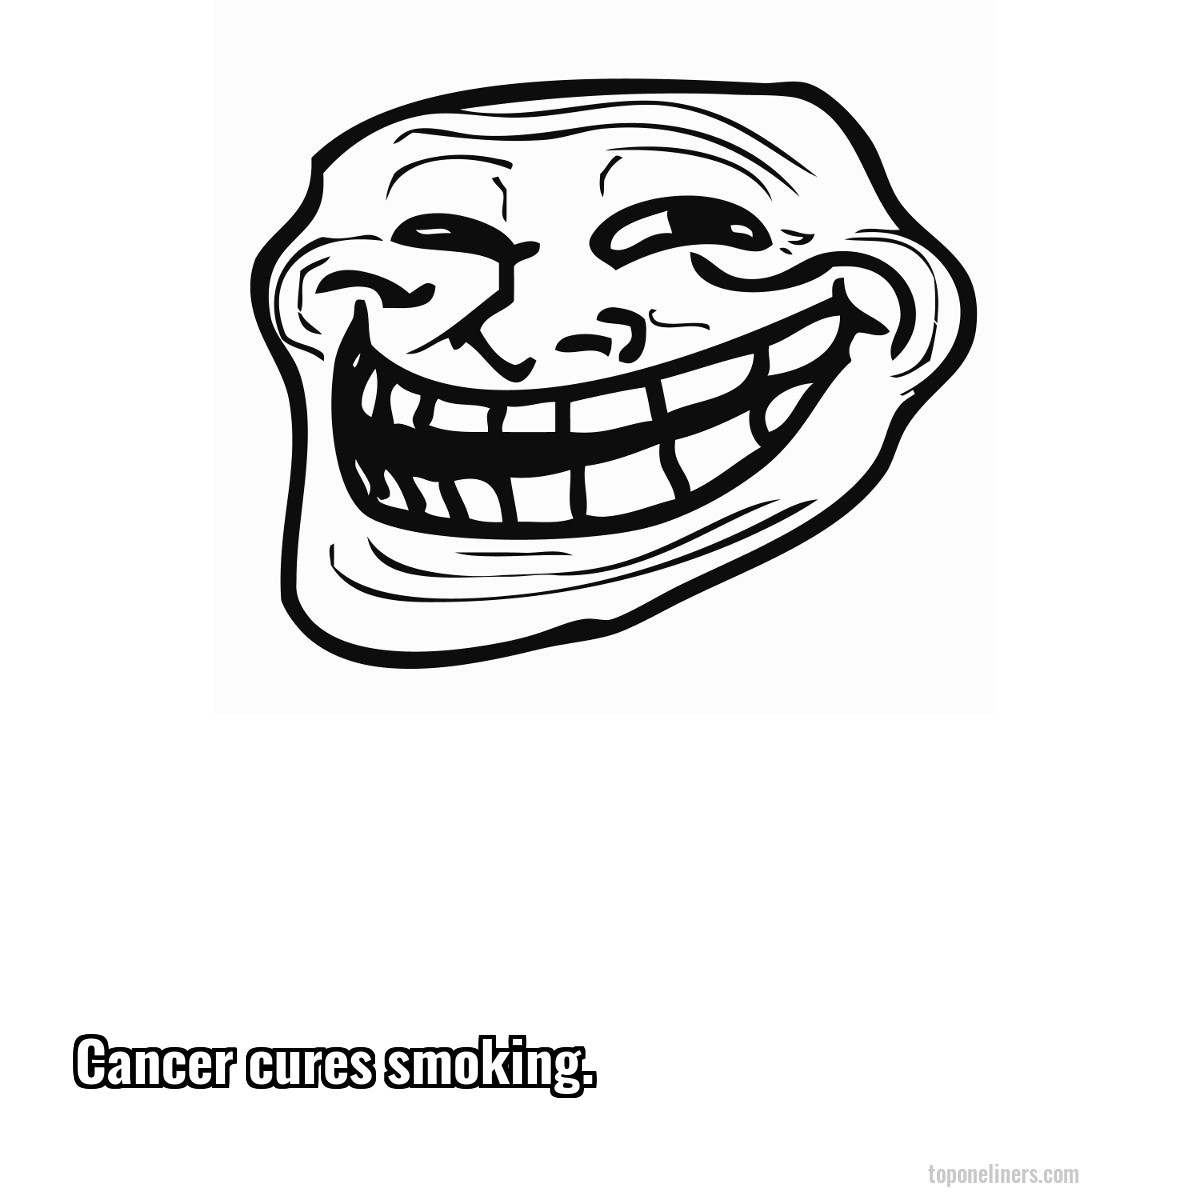 Cancer cures smoking.
